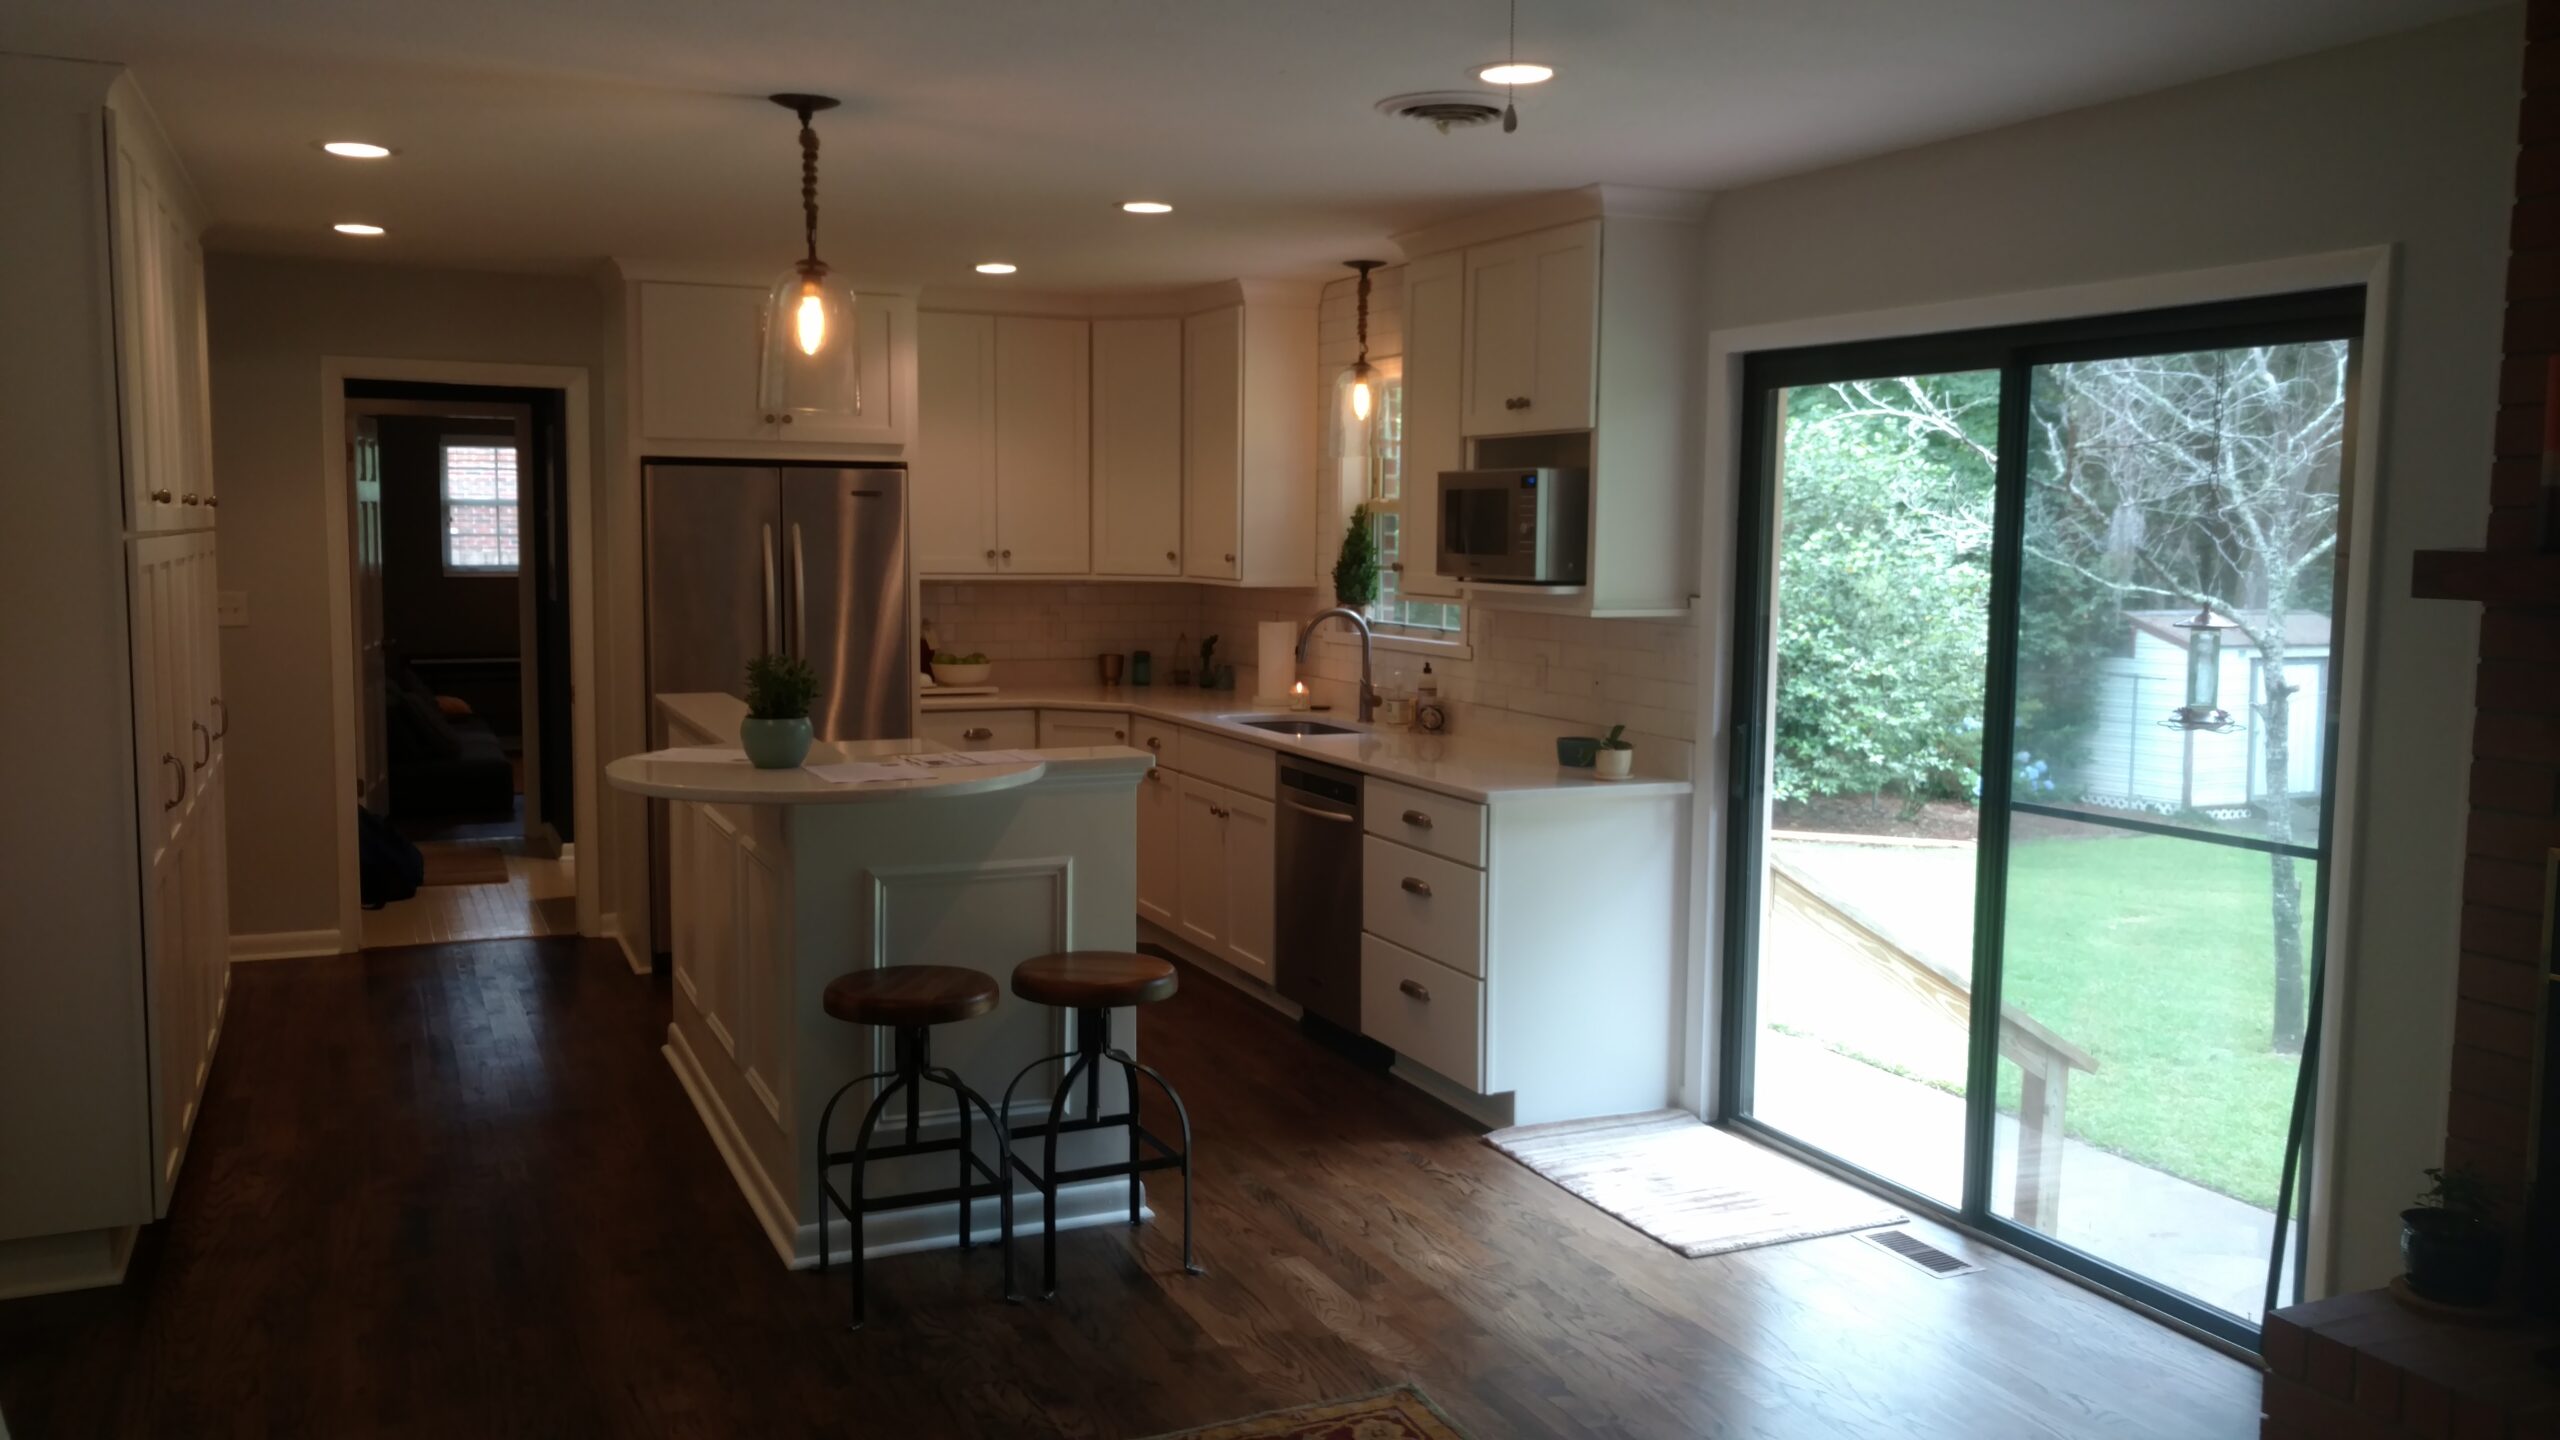 Photo is of a kitchen that has been remodeled. A patio door is included in the picture. Some remodeling will provide more sellers proceeds